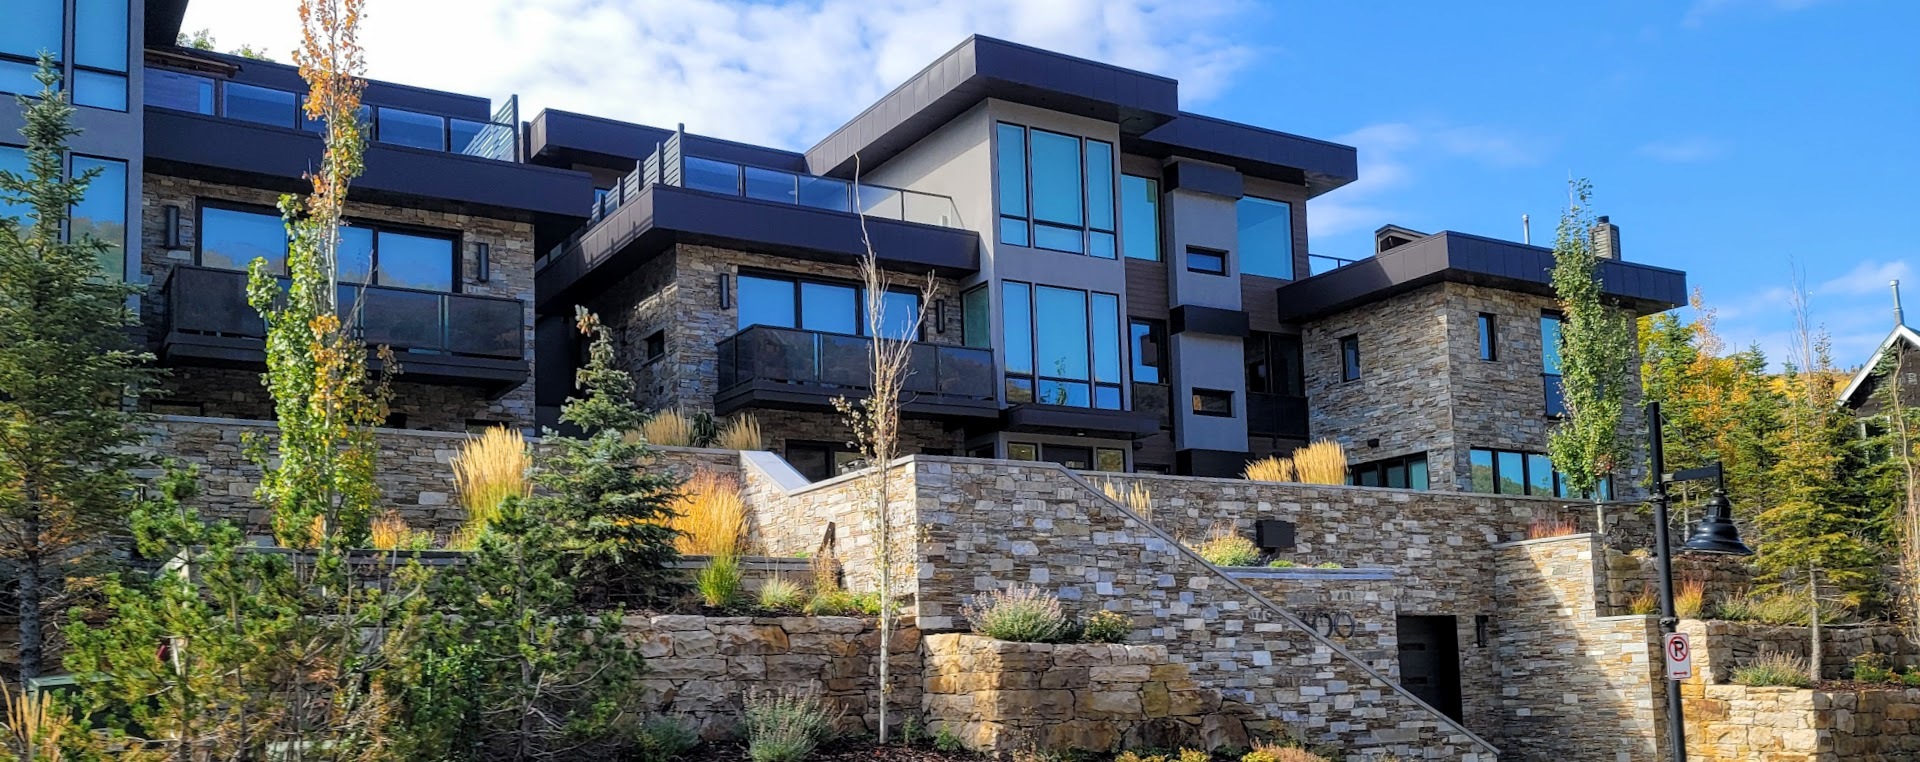 Discover the Benefits of Owning a Ski Condo in Park City - Is it a Smart Investment Choice?